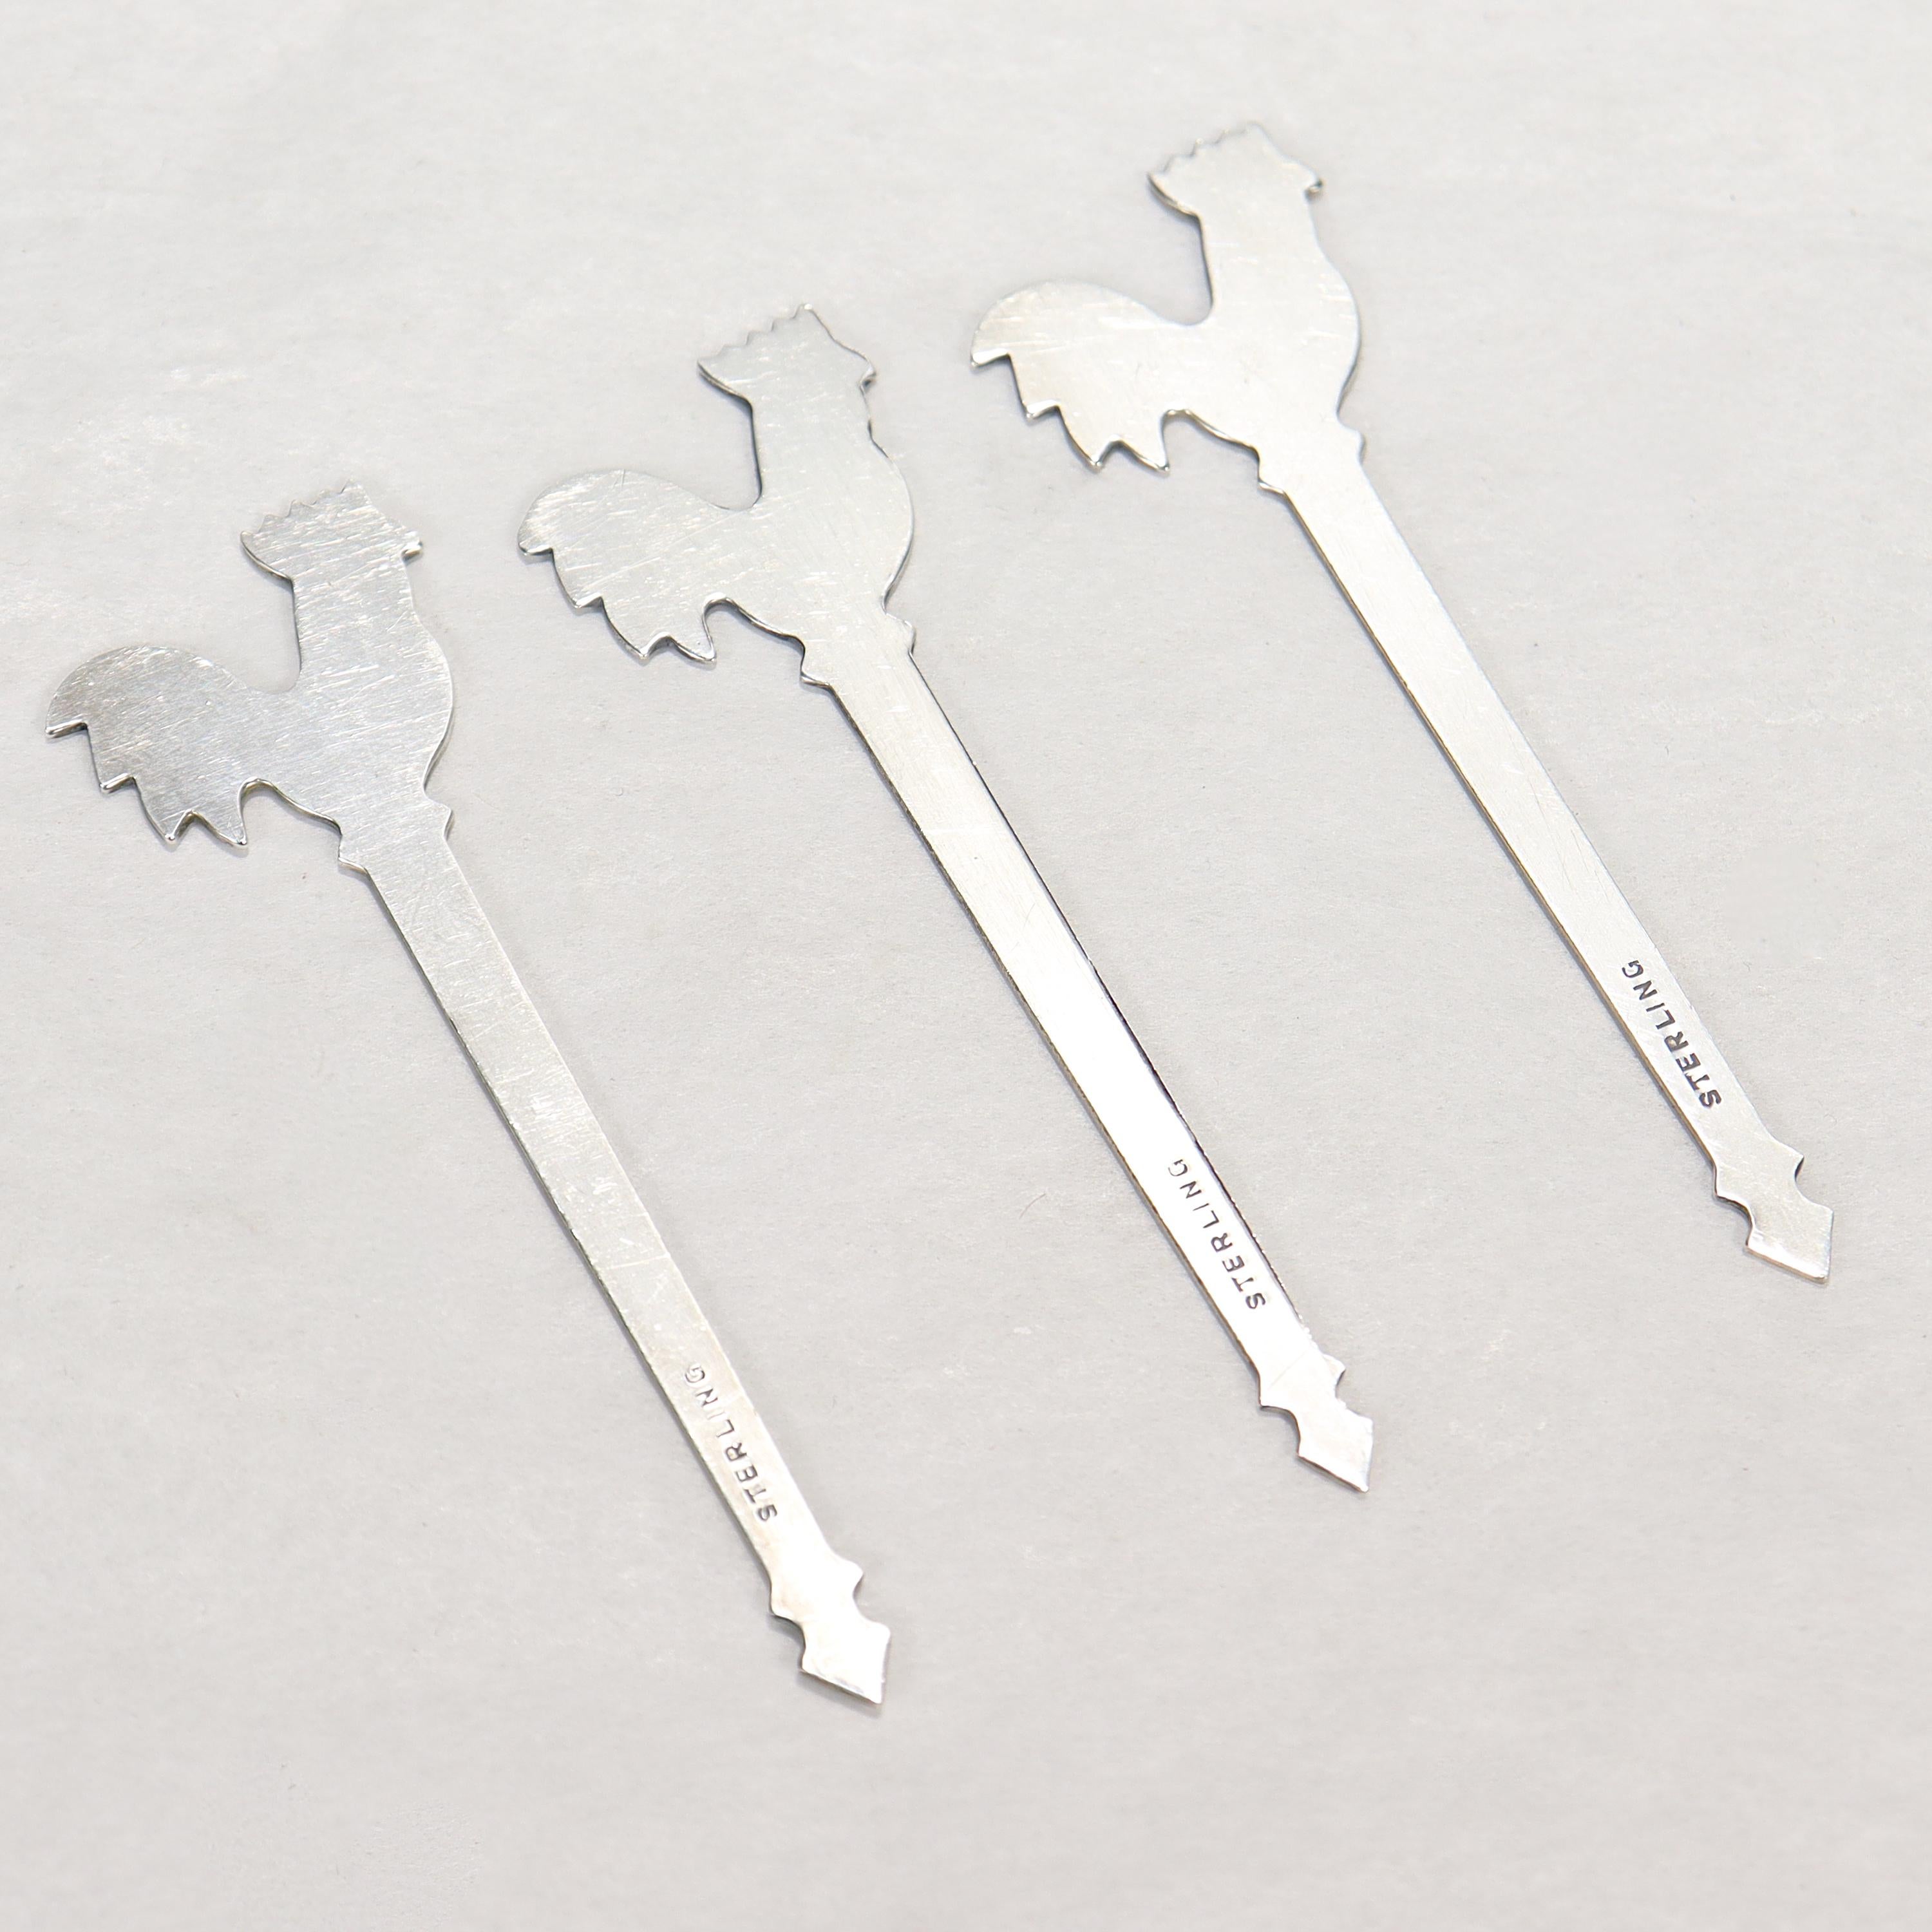 A fine set of 3 vintage martini or cocktail picks.

In sterling silver. 

With rooster finials. 

Simply great bar accessories!

Date:
Mid-20th Century

Overall Condition:
They are in overall good, as-pictured, used estate condition with some fine &